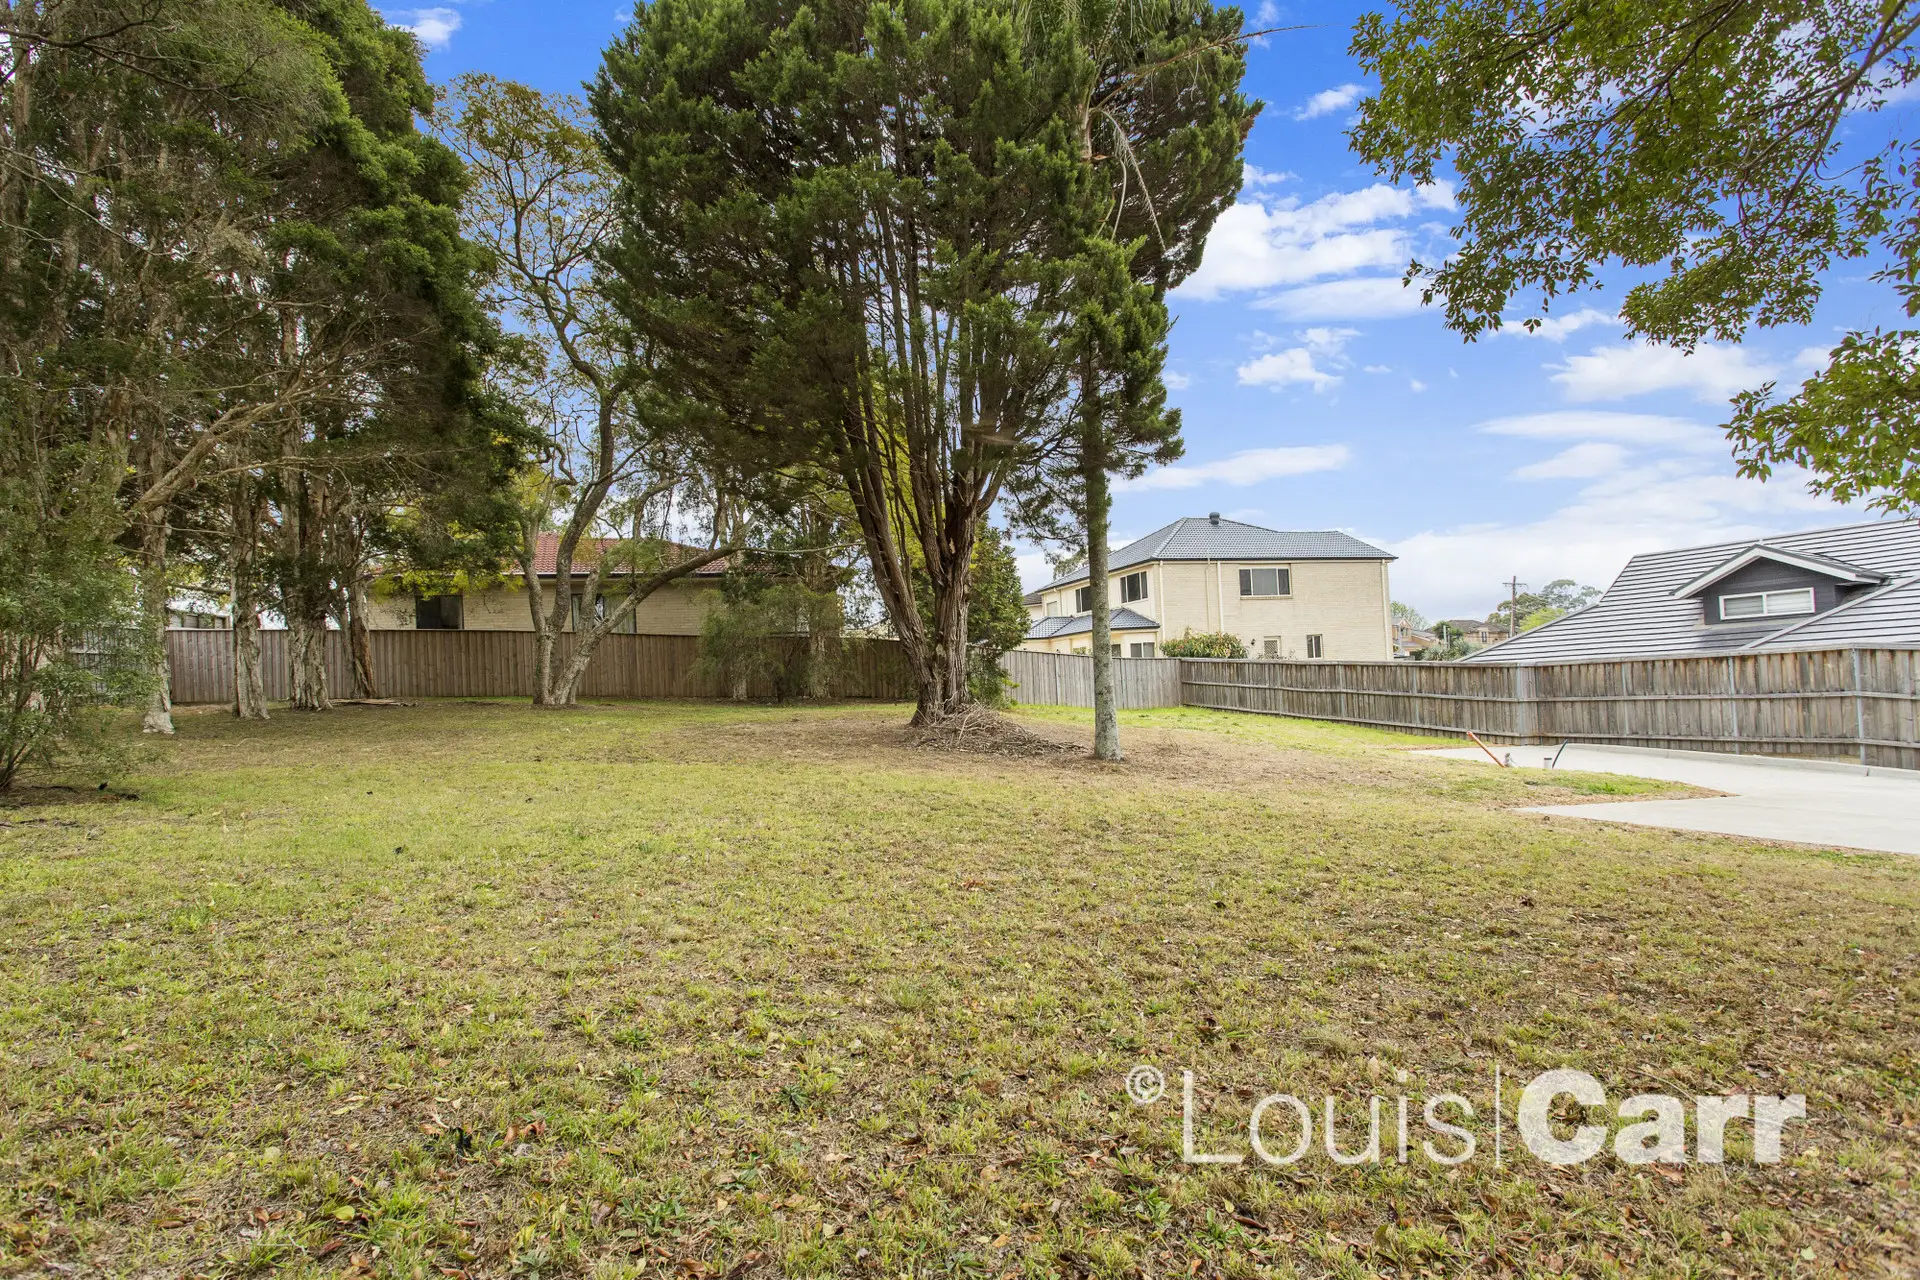 Photo #9: 3A Cherrybrook Road, West Pennant Hills - Sold by Louis Carr Real Estate